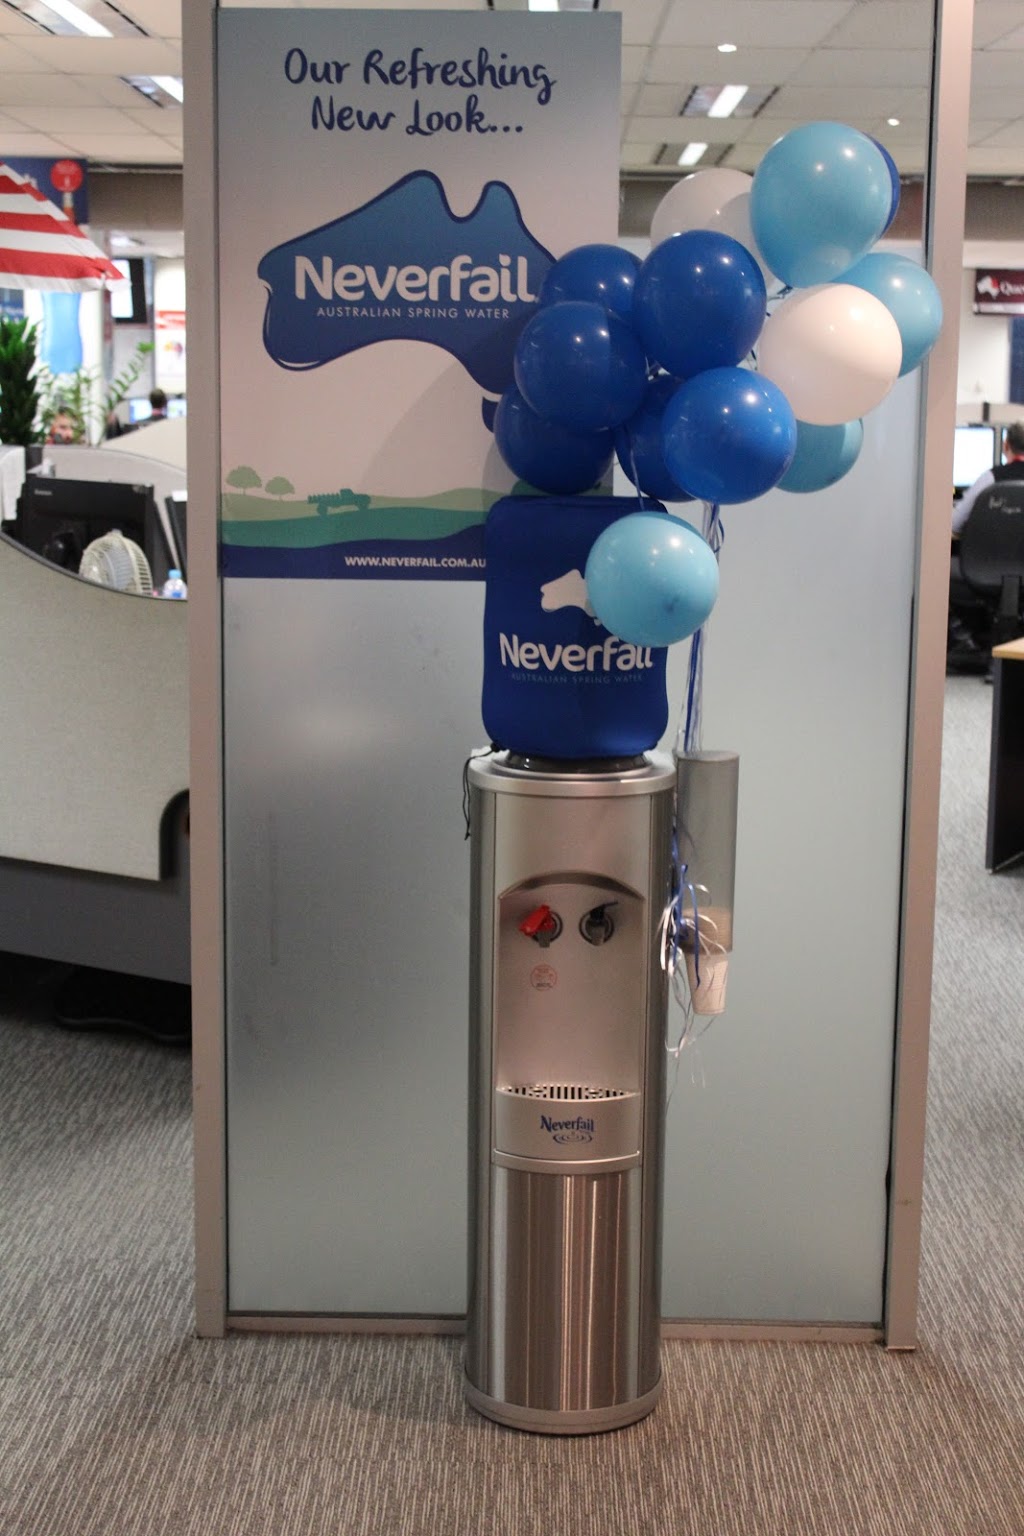 Neverfail Spring Water NSW Distribution | Roussell Rd, Eastern Creek NSW 2766, Australia | Phone: 13 30 37